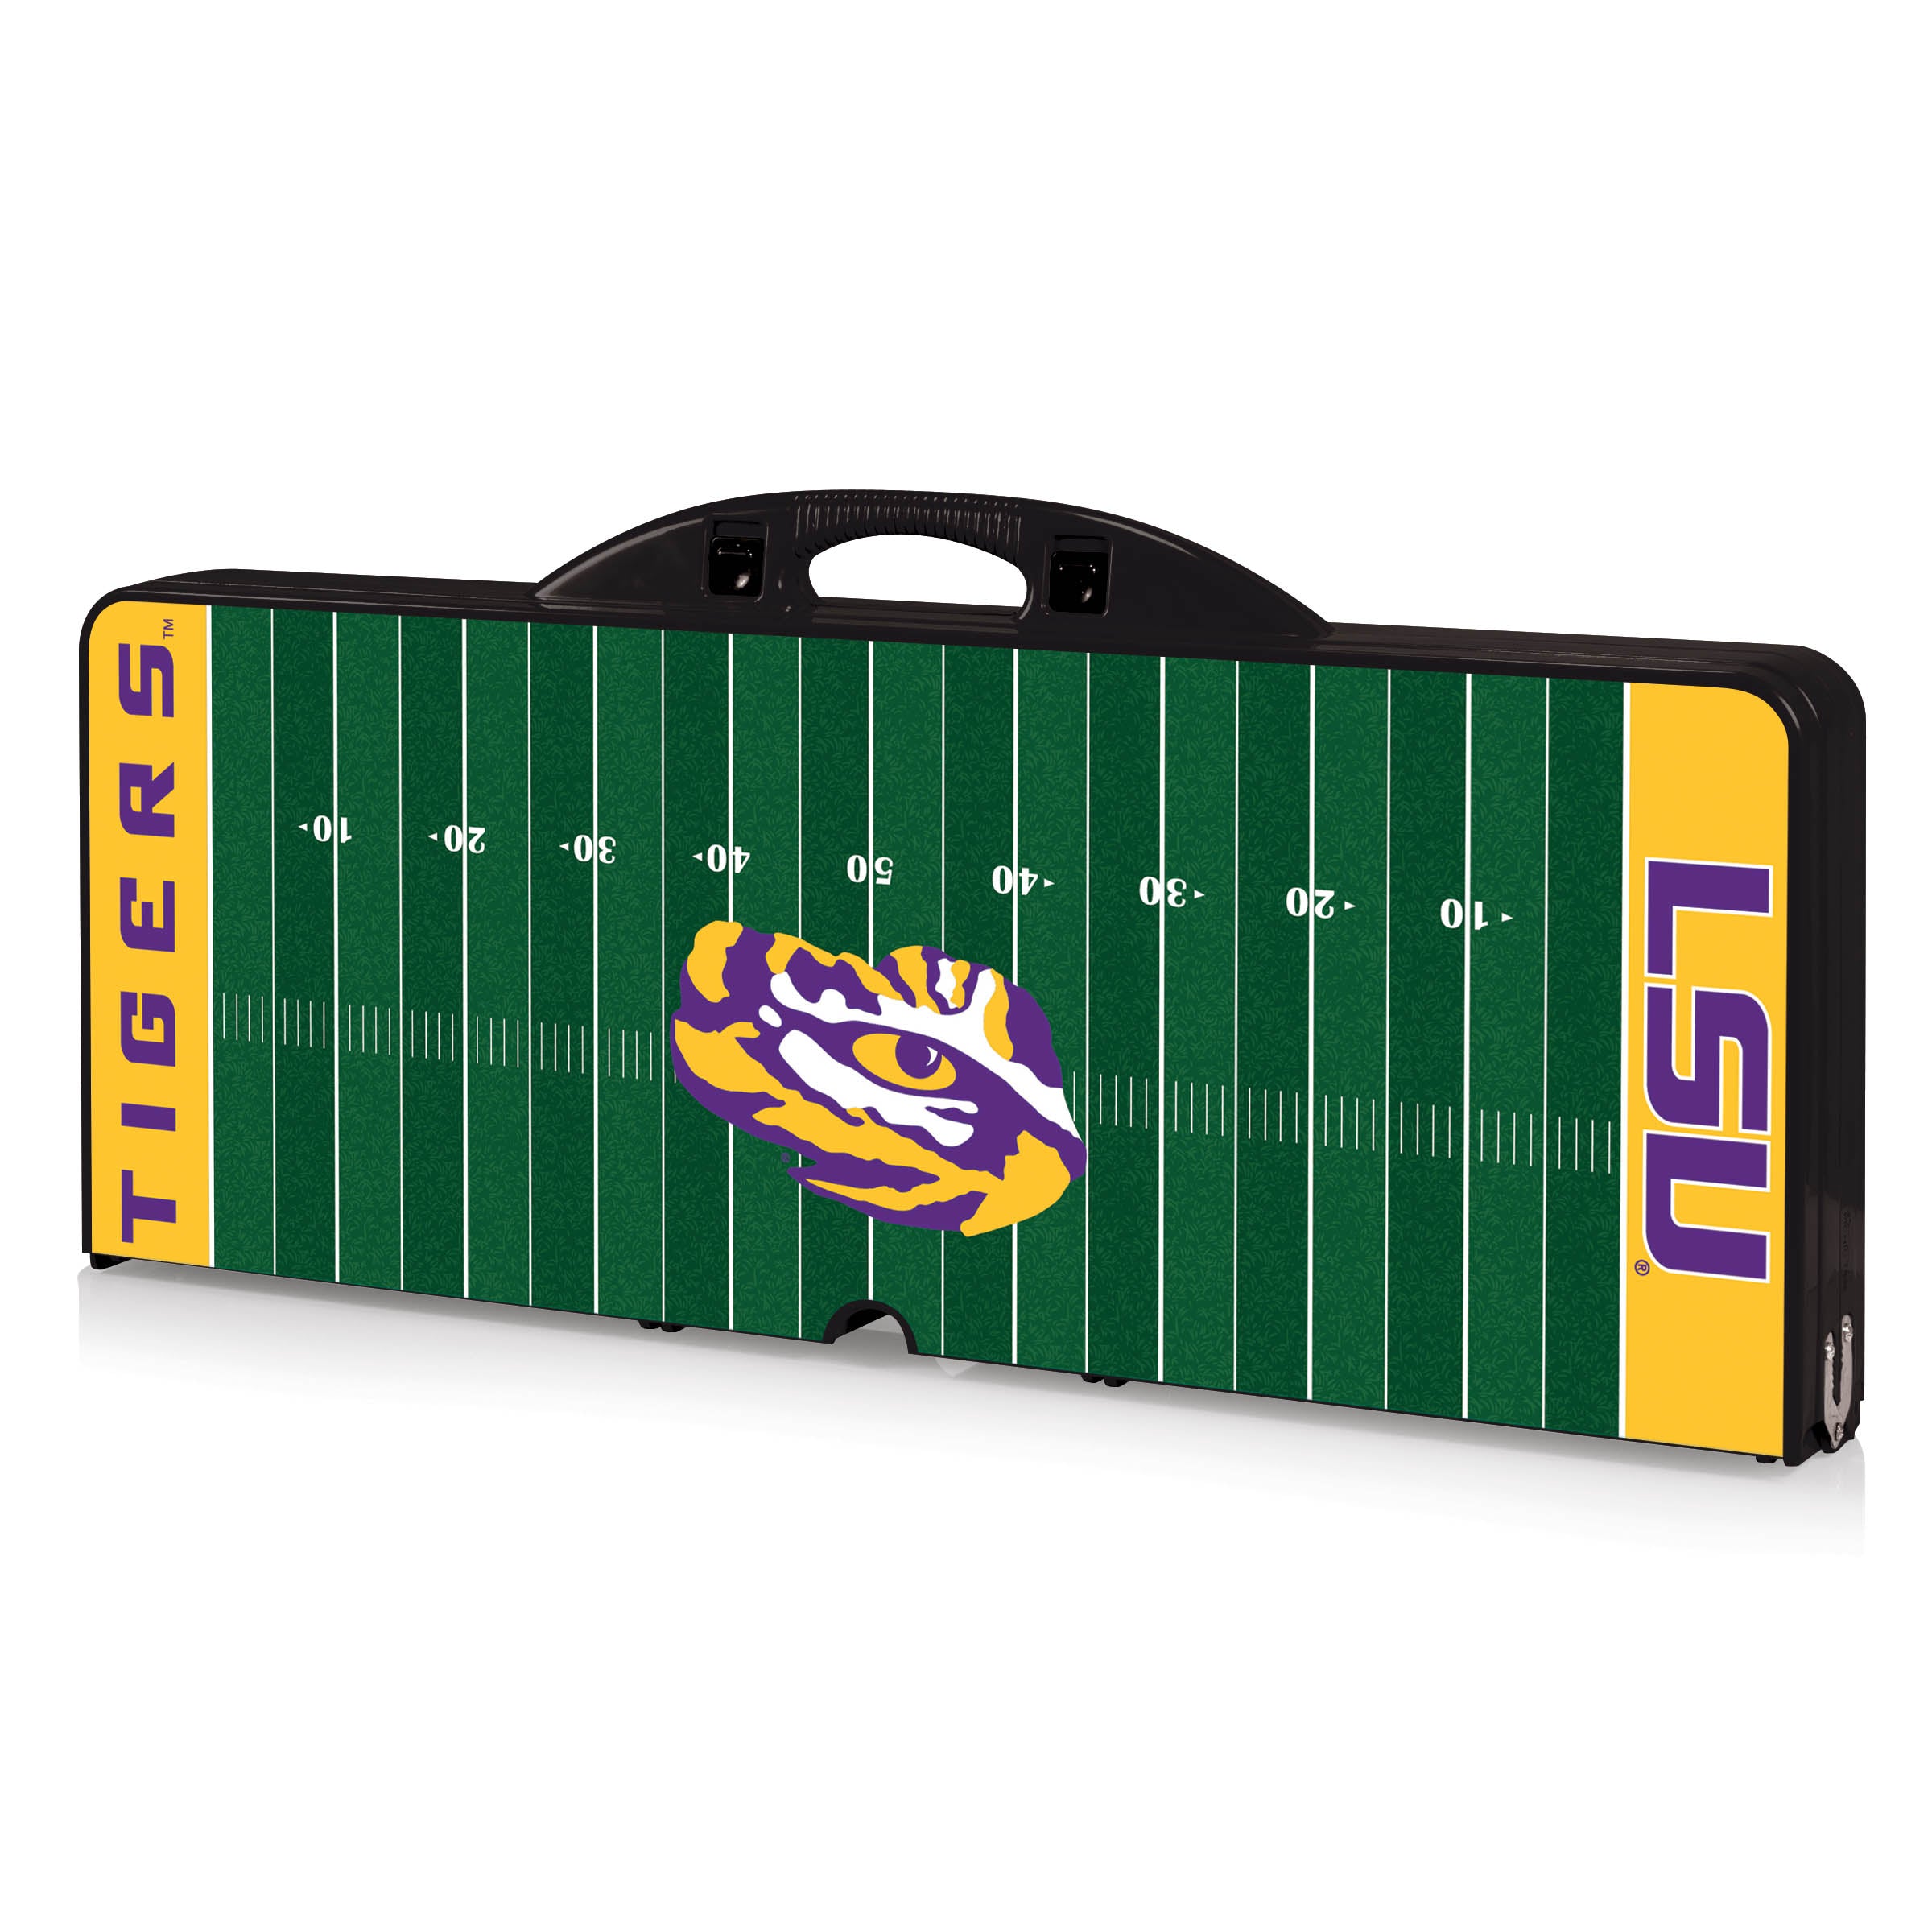 LSU Tigers Football Field - Picnic Table Portable Folding Table with Seats